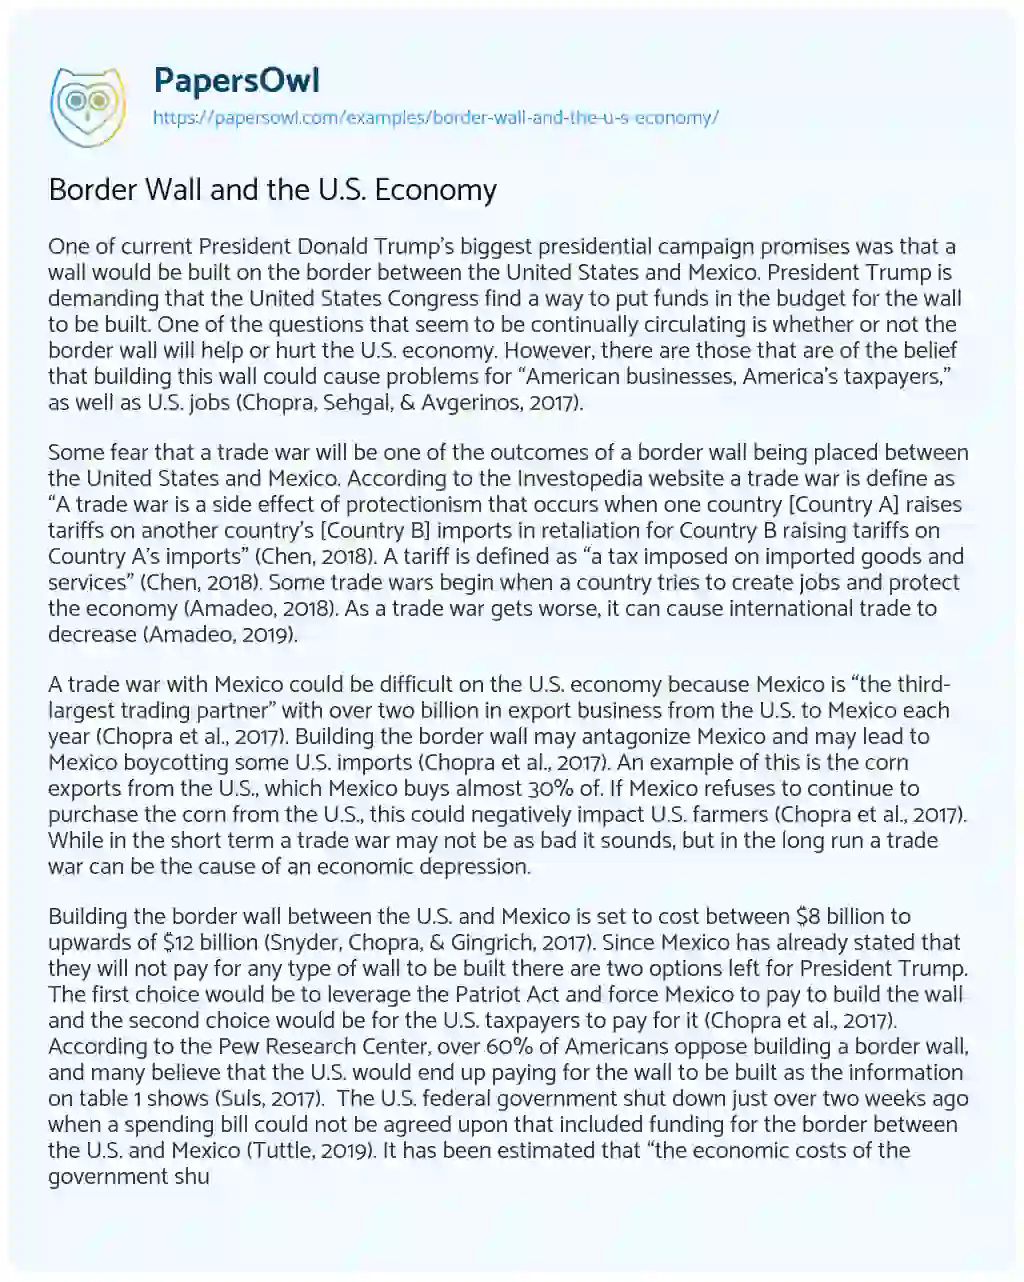 Essay on Border Wall and the U.S. Economy